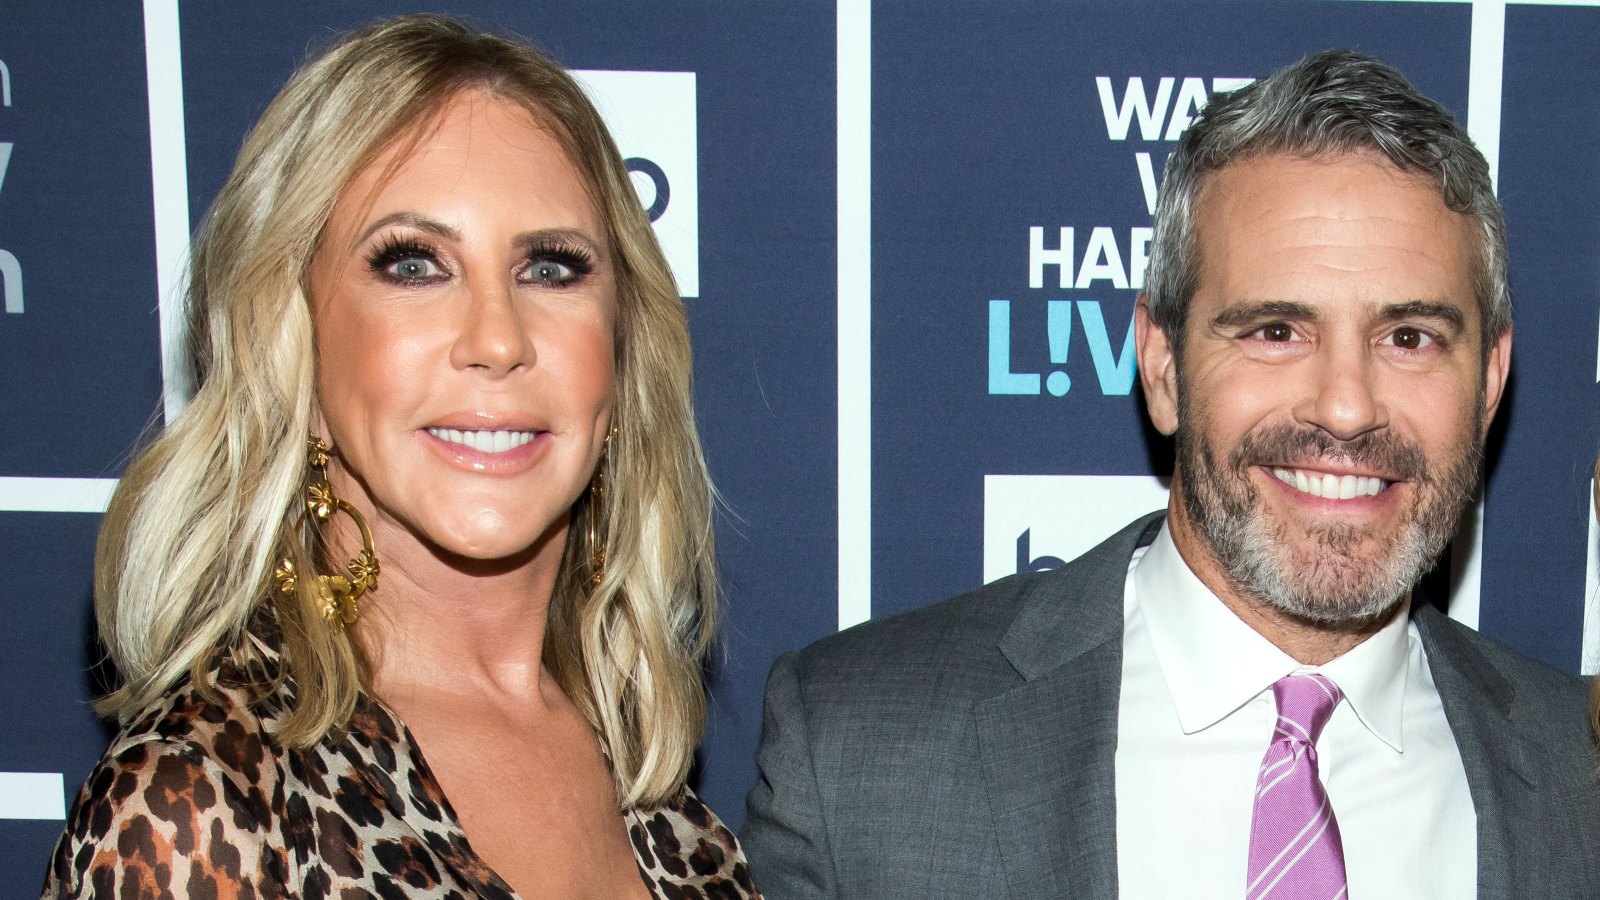 Andy Cohen Reacts to Vicki Gunvalson Leaving ‘RHOC